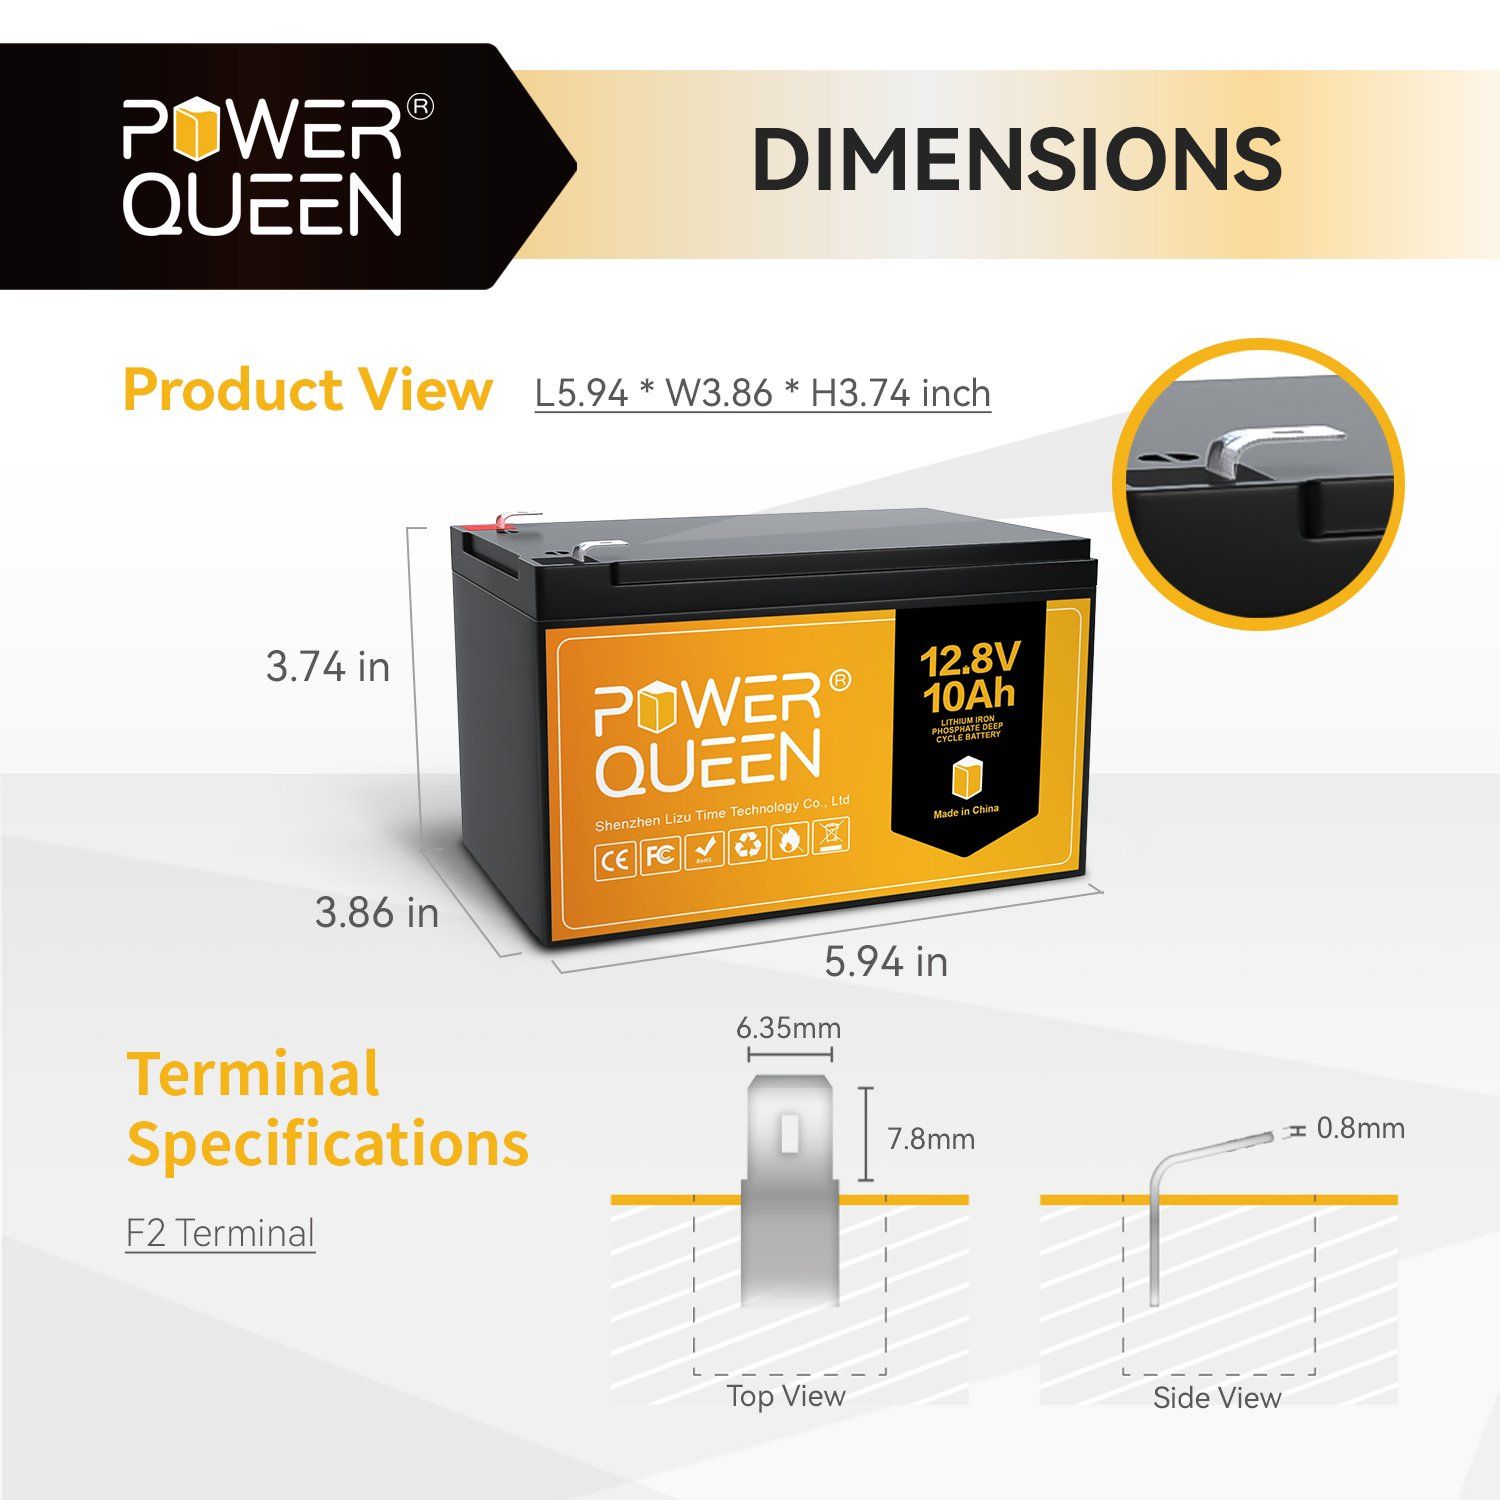 12.8V 10Ah LiFePO4 Battery, Built-IN 10A BMS Power Queen